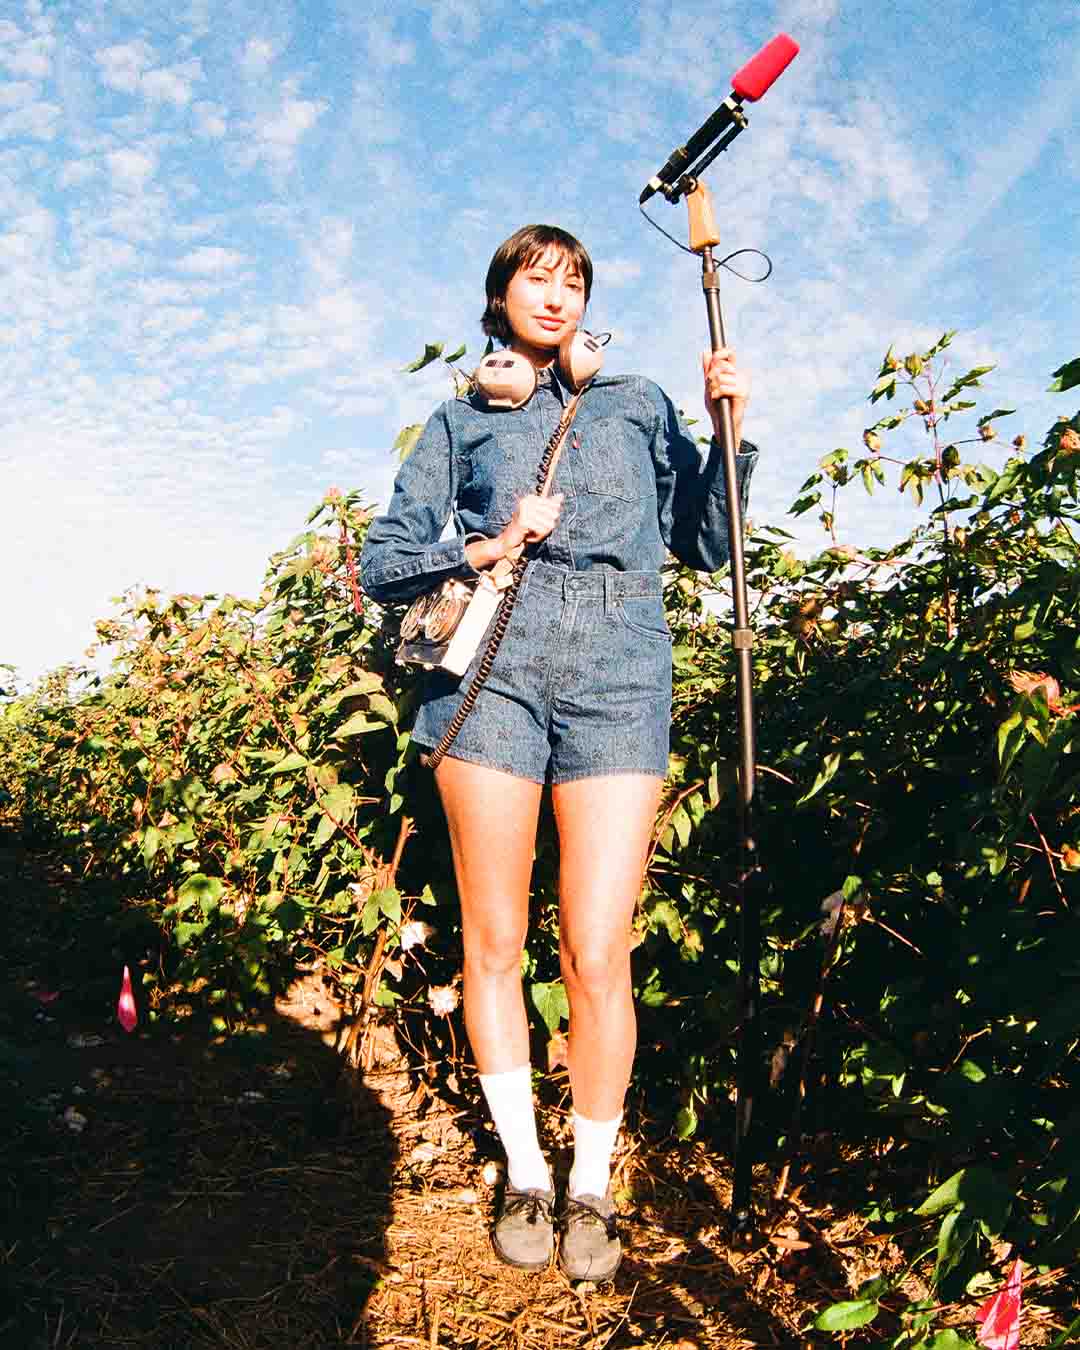 A woman who styled in Levi's Wellthread collection is holding a boom microphone  - Levi's Hong Kong